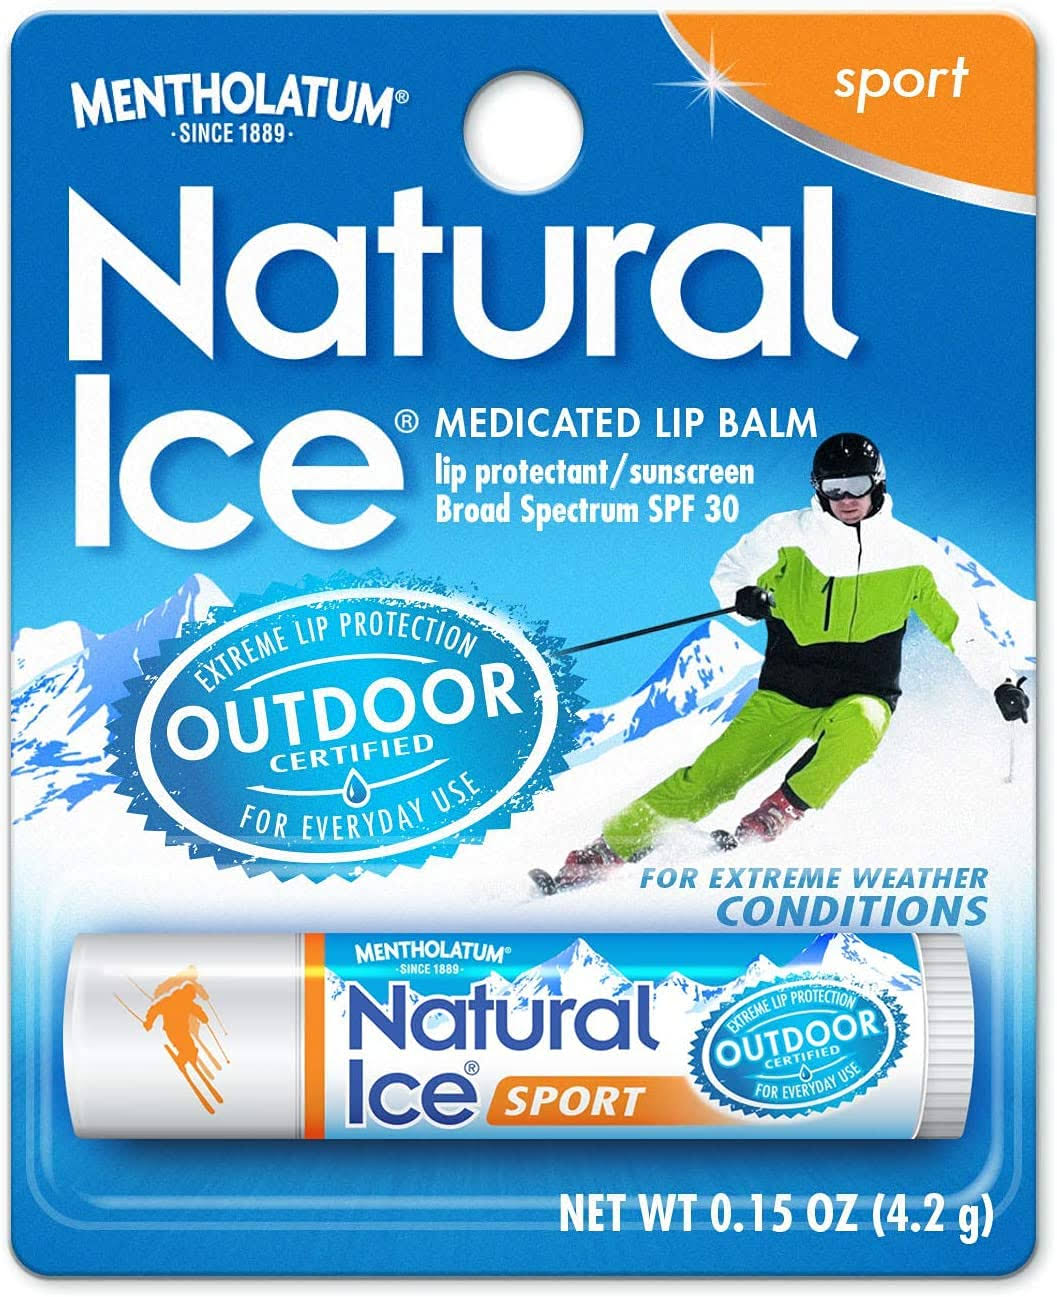 Natural Ice Sport Medicated Lip Balm - 4.5g